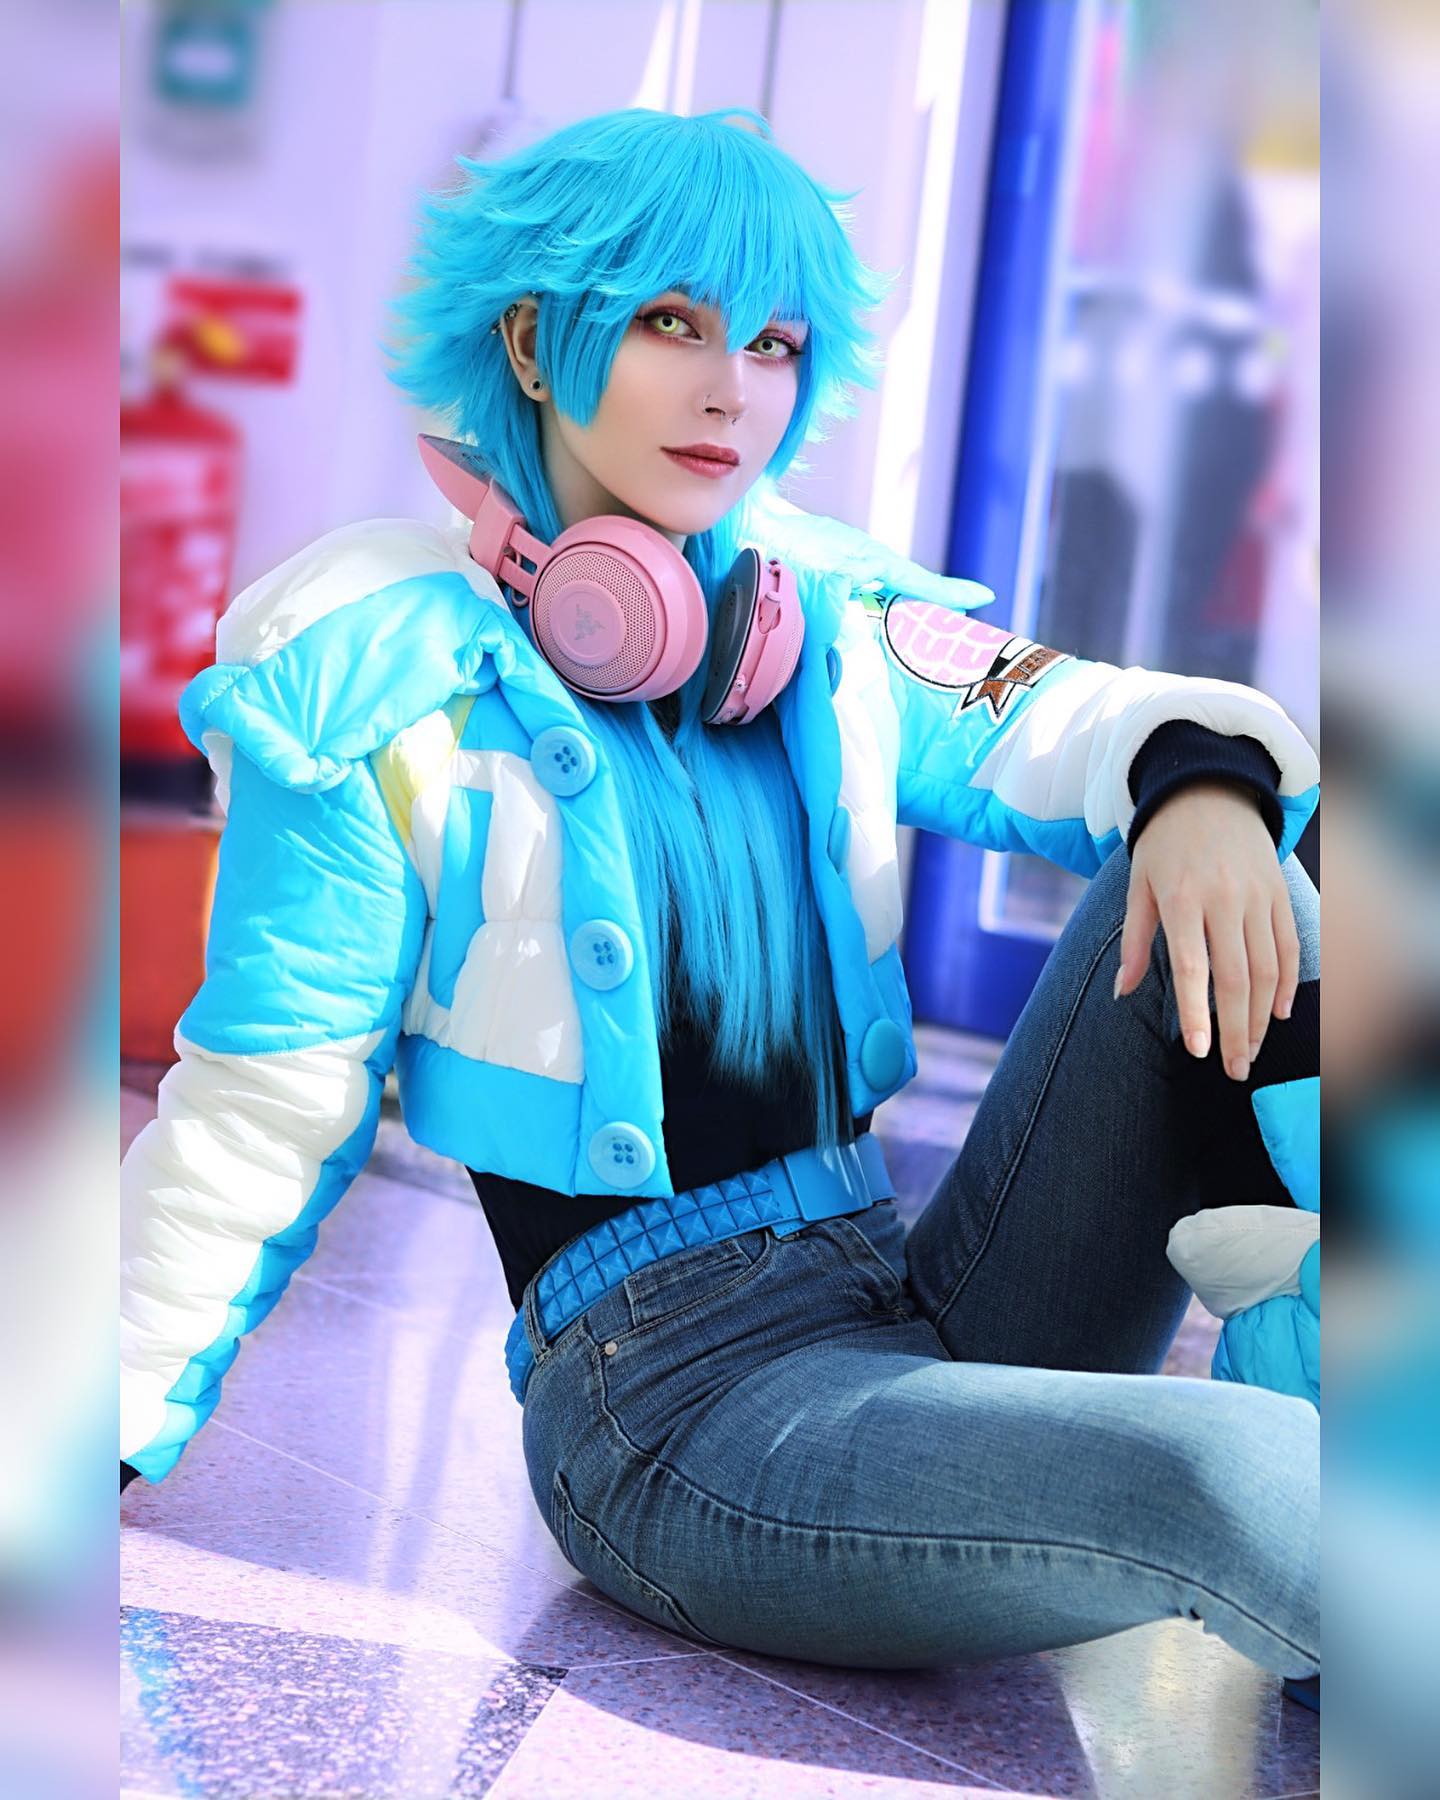 don’t trust a hoe, never trust a hoe 😝💙
~
after like 8 years of cosplaying aoba i finally got proper photos im so happy 🥹 felt so good to cosplay him to con again —> swipe to the end for full photo @megaconlive 
~
⛓cosplayer: @riotwolf.cos 
💙character: aoba seragaki
⛓game: dmmd
📸 @hypercos.photography @hyper.cos 
~
~
~
#aobaseragaki #aobacosplay #aobaseragakicosplay #aoba #dmmd #dmmdcosplay #dramaticalmurder #dramaticalmurdercosplay #megacon #cosplayer #bl #yaoicosplay